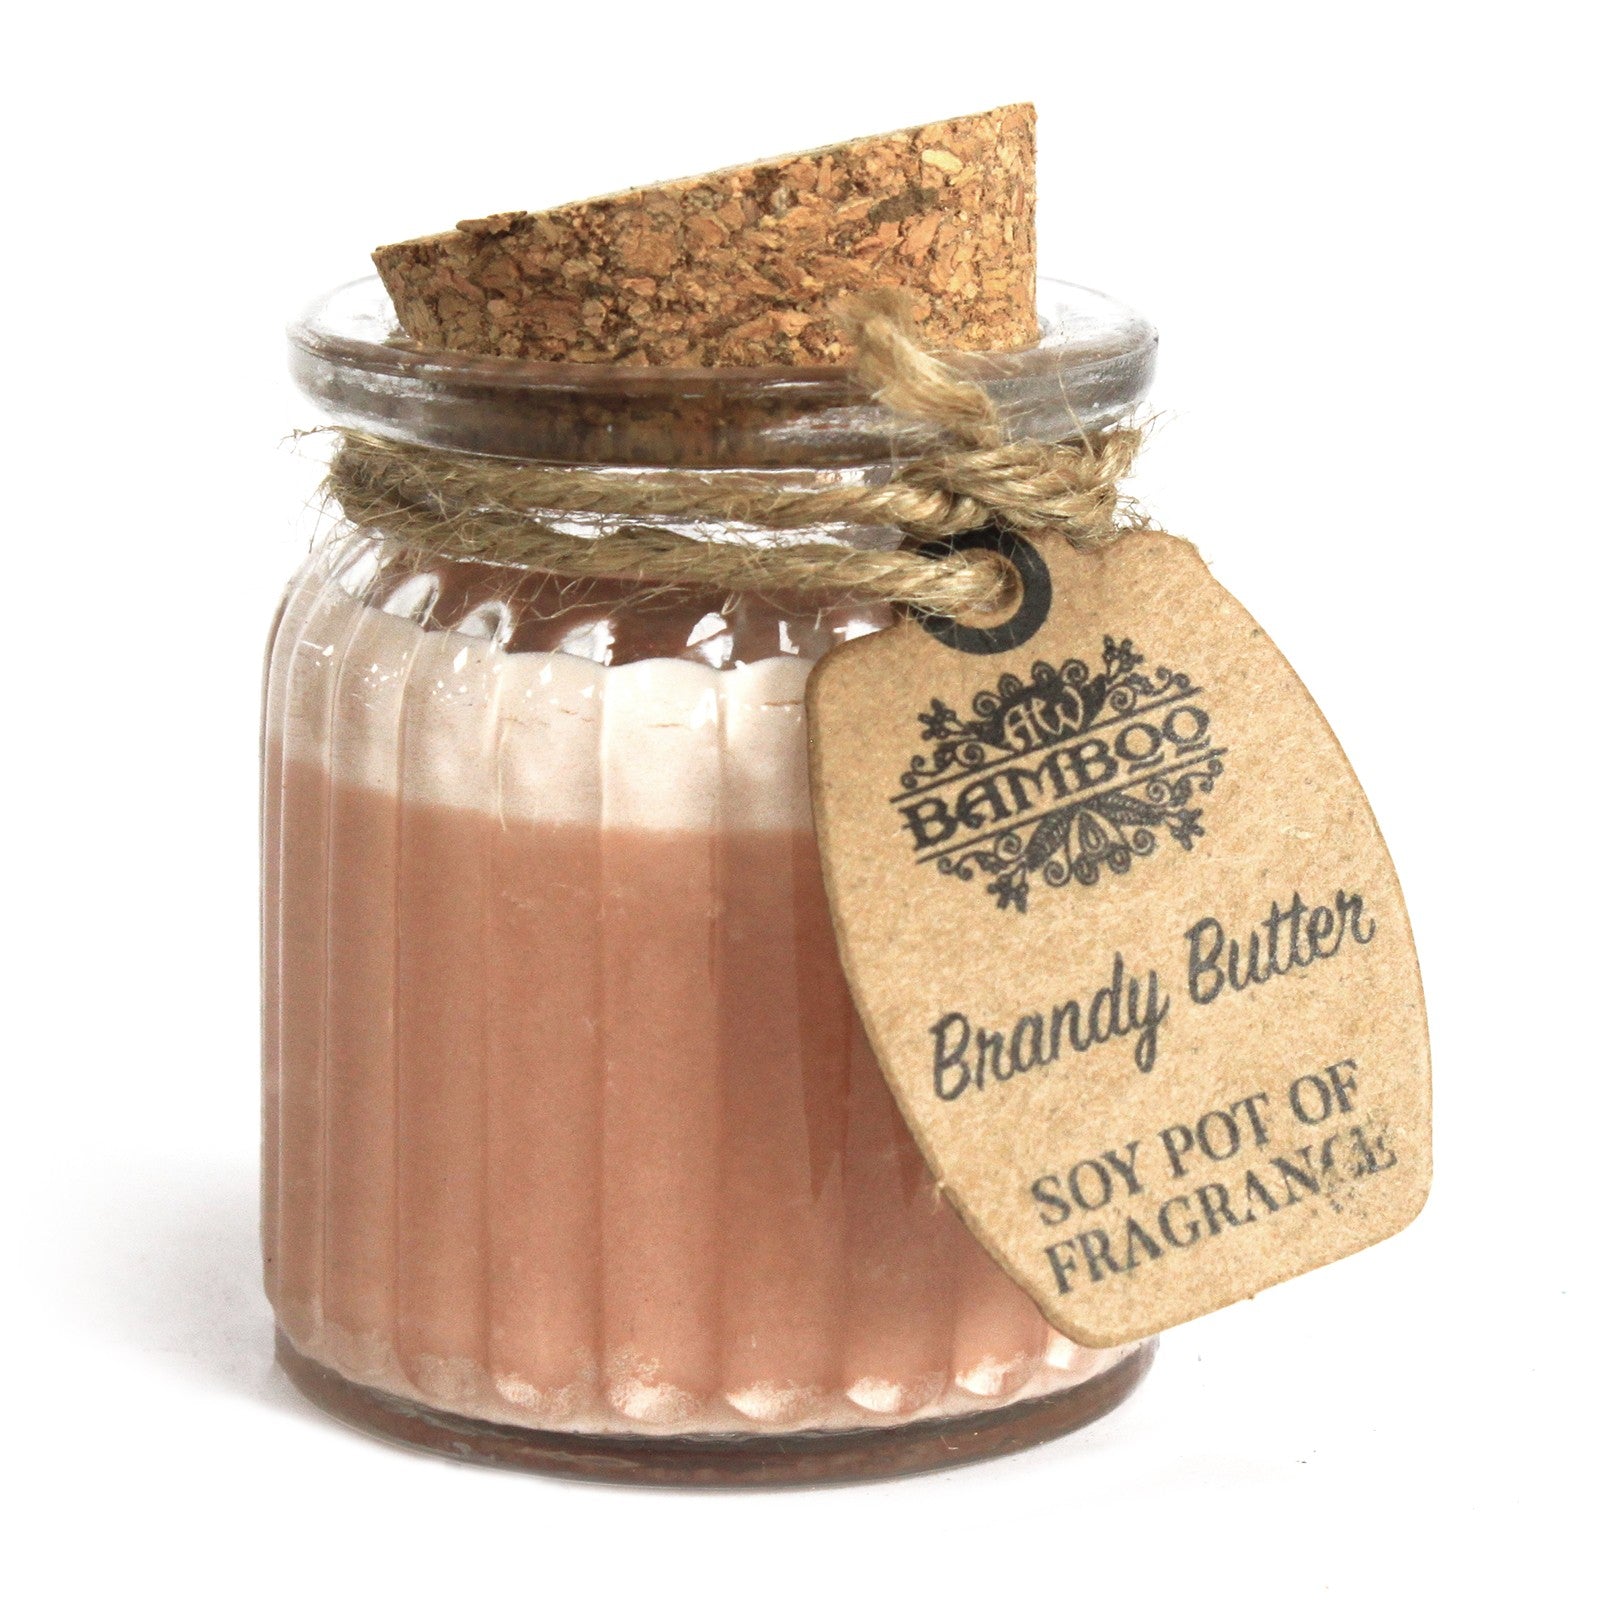 View Brandy Butter Soy Pot of Fragrance Candles information